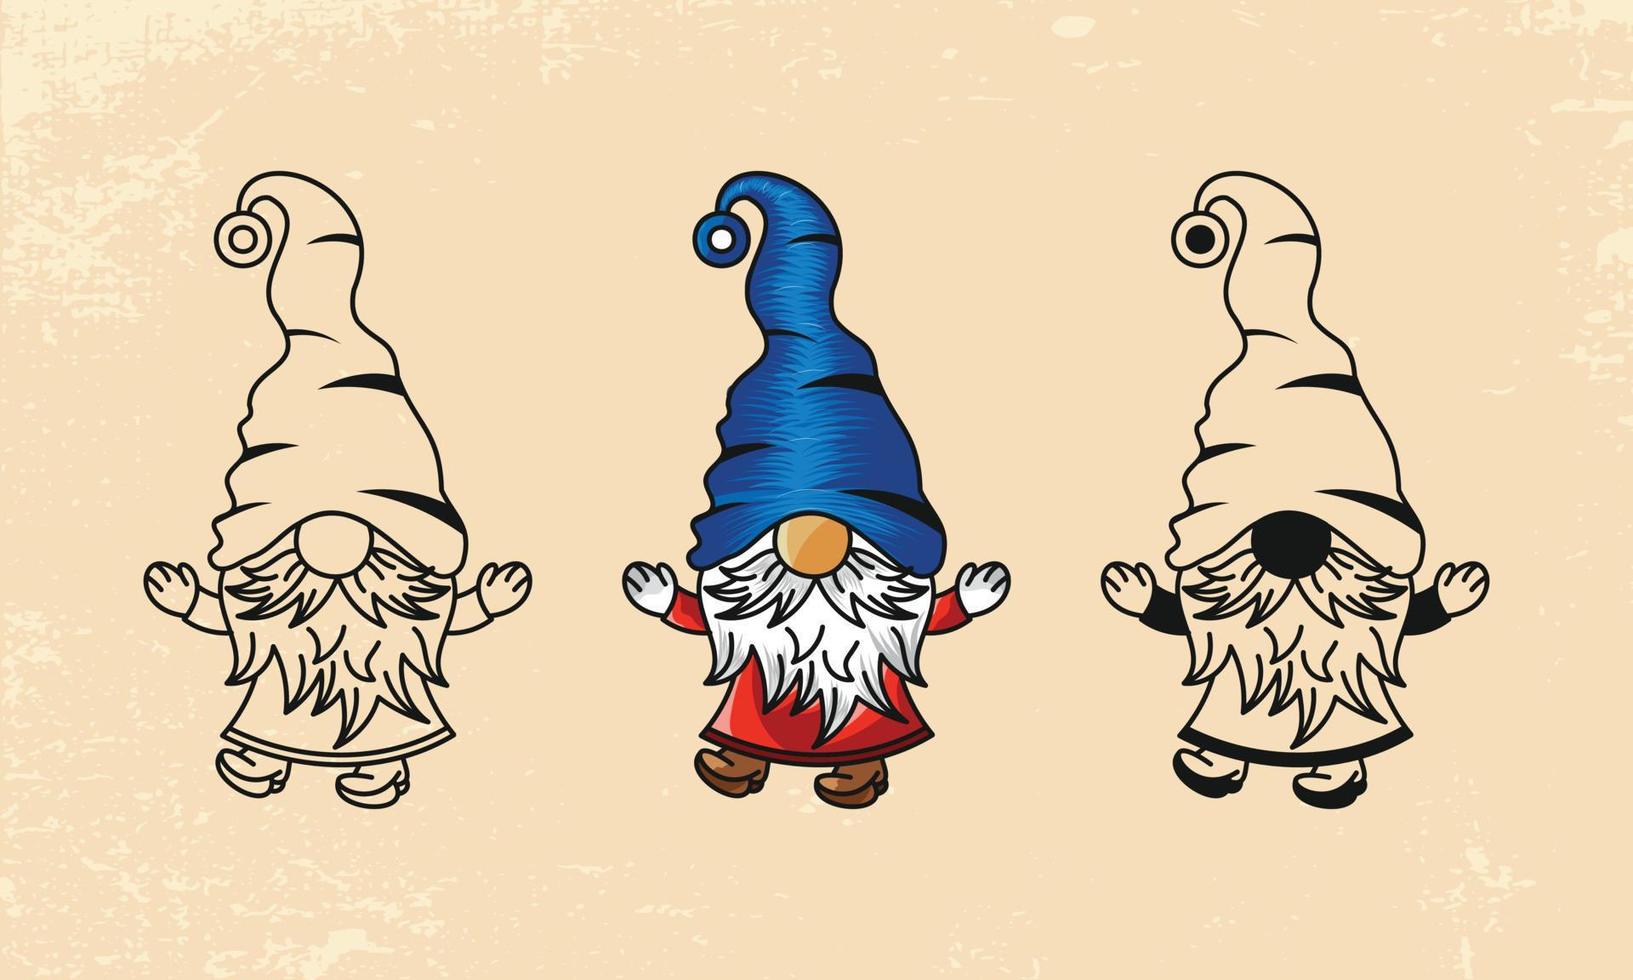 Christmas Gnomes Vector illustration collection